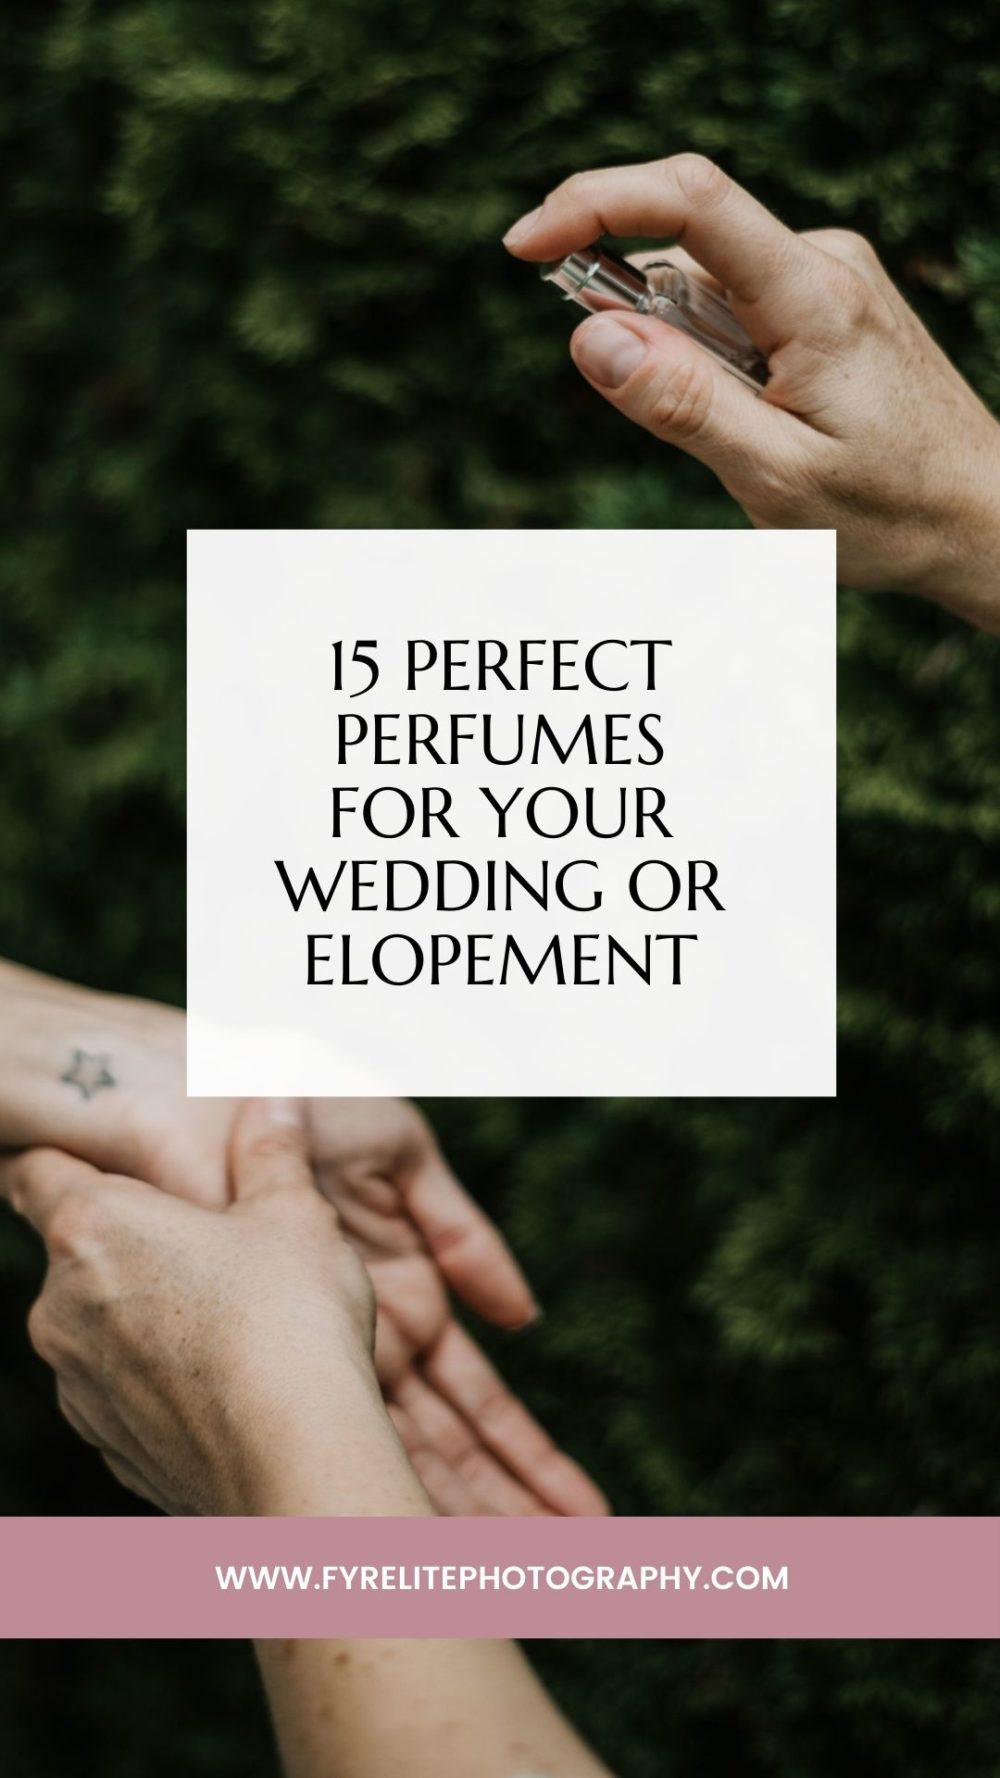 15 Perfect Perfumes for your wedding or elopement by destination wedding photographer fyrelite photography